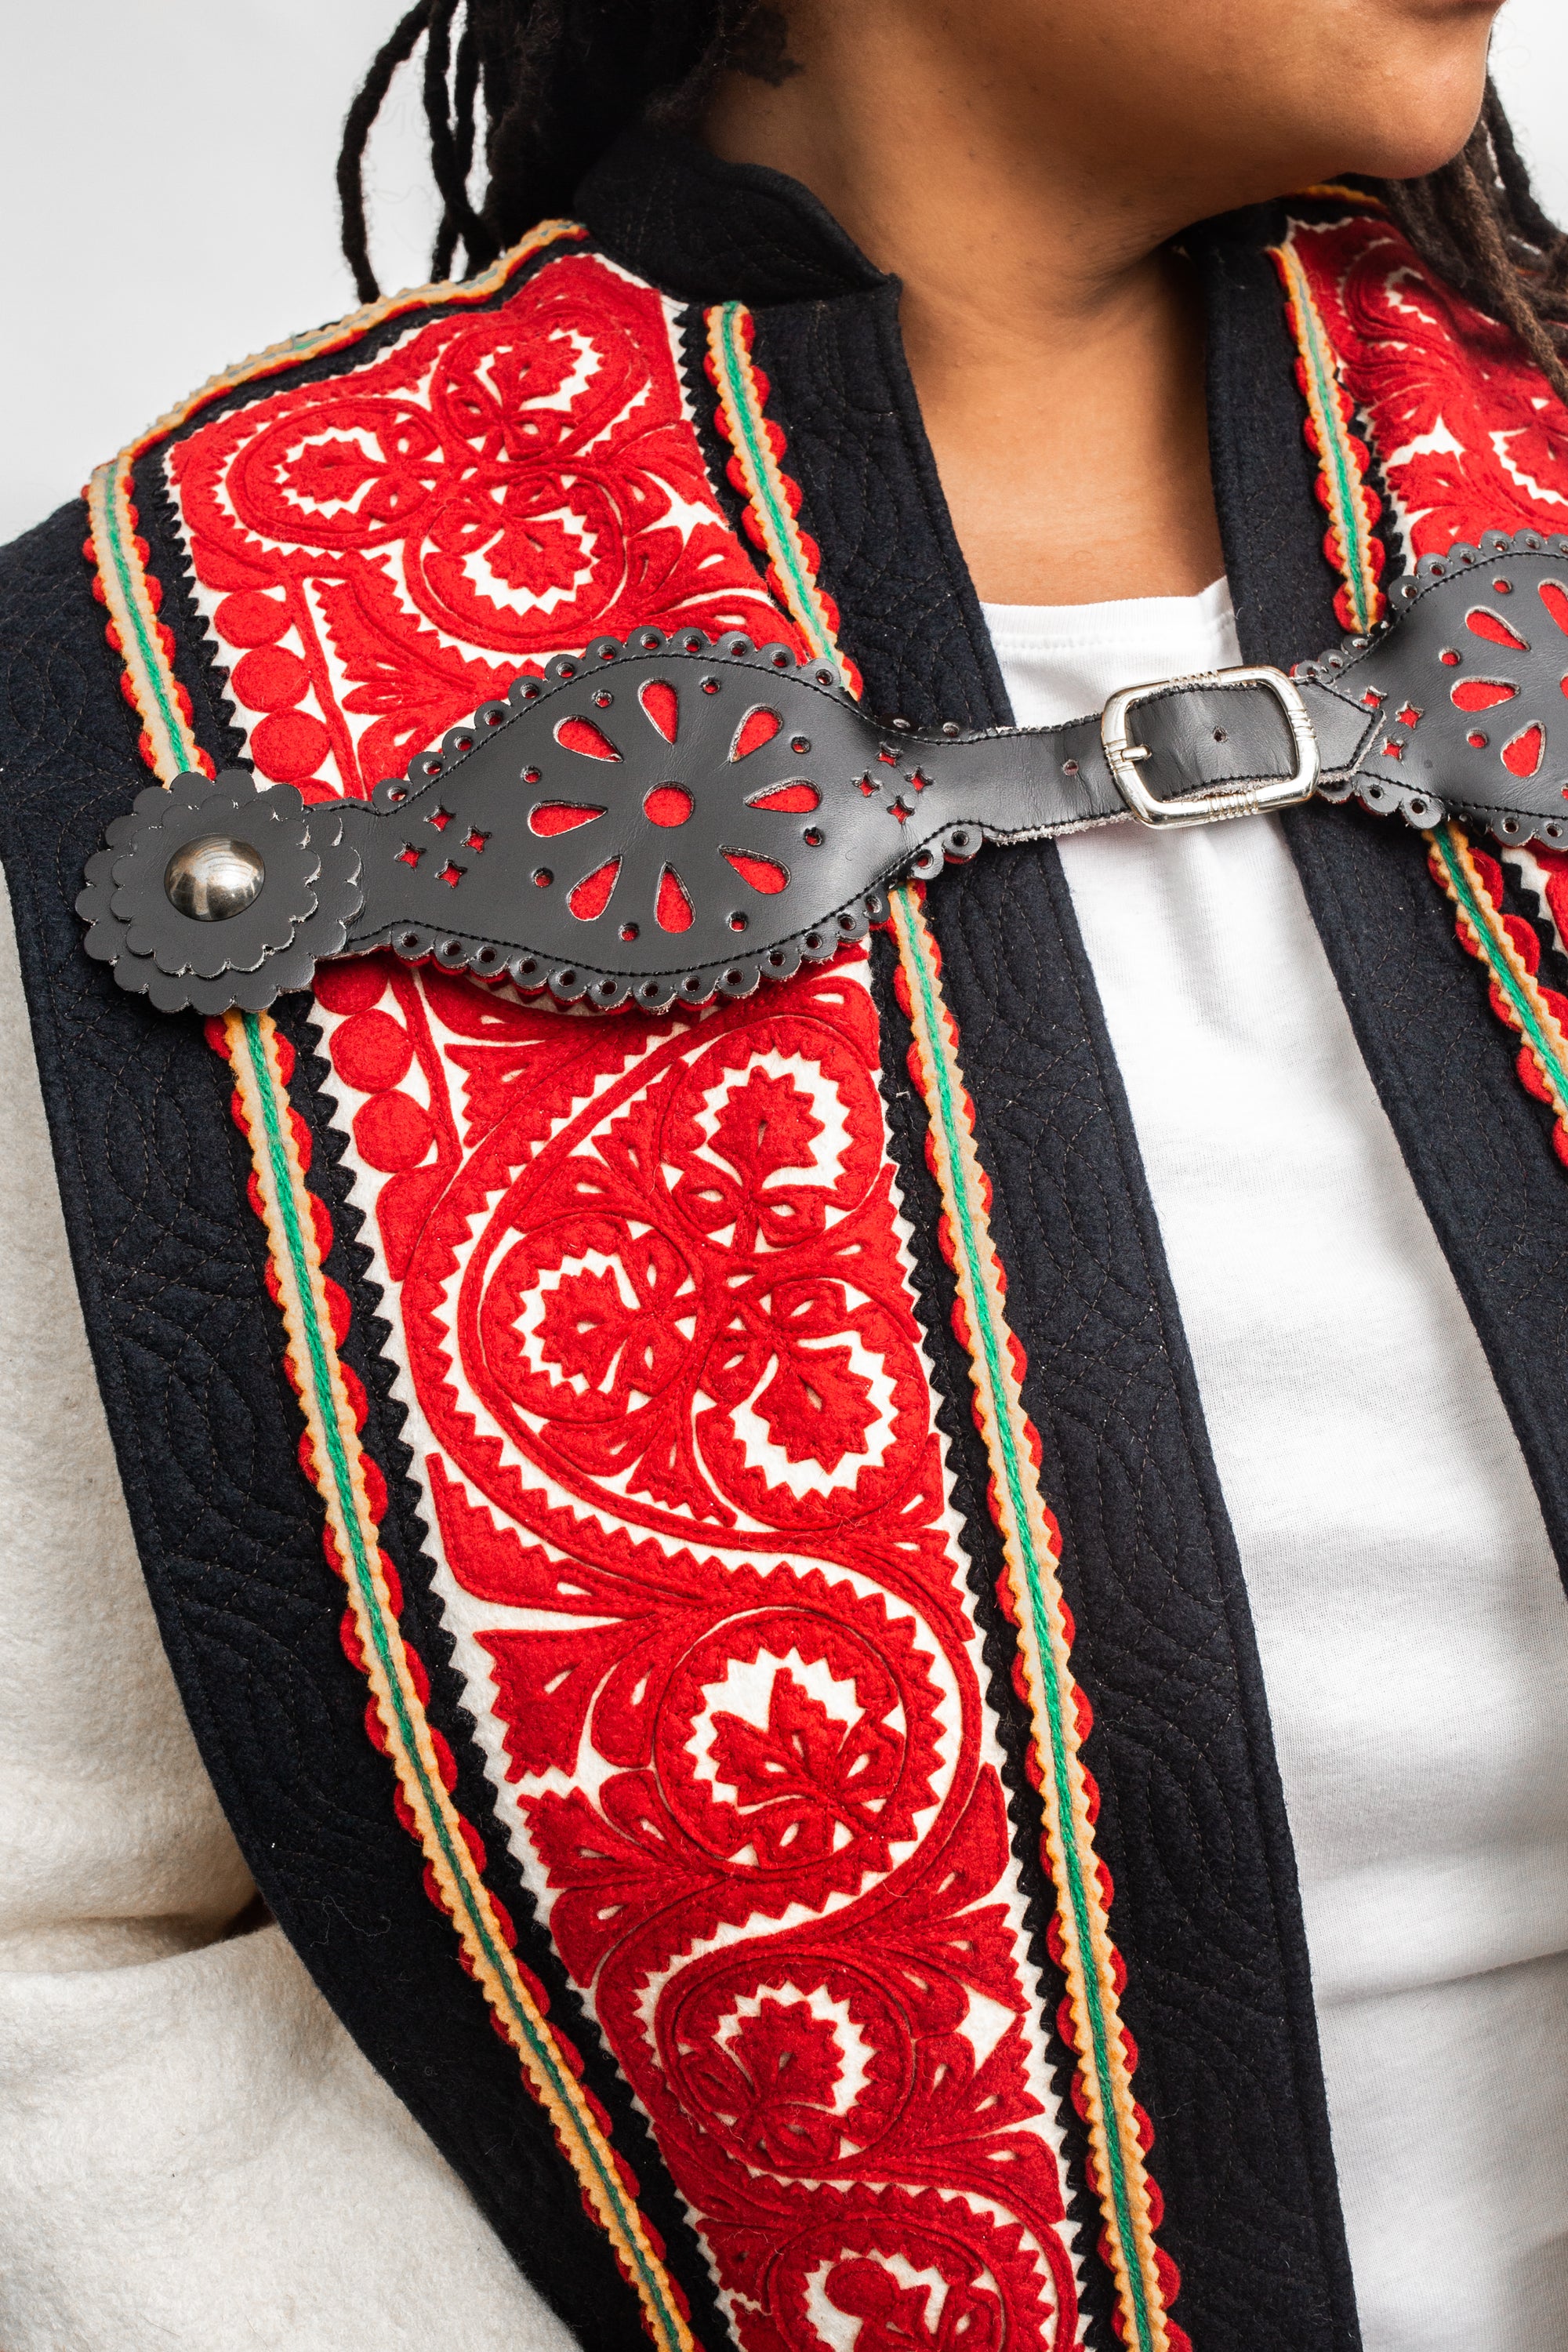 Close up of the cut feltwork of the szur - black, red, and white.  With the decorative leather buckle.